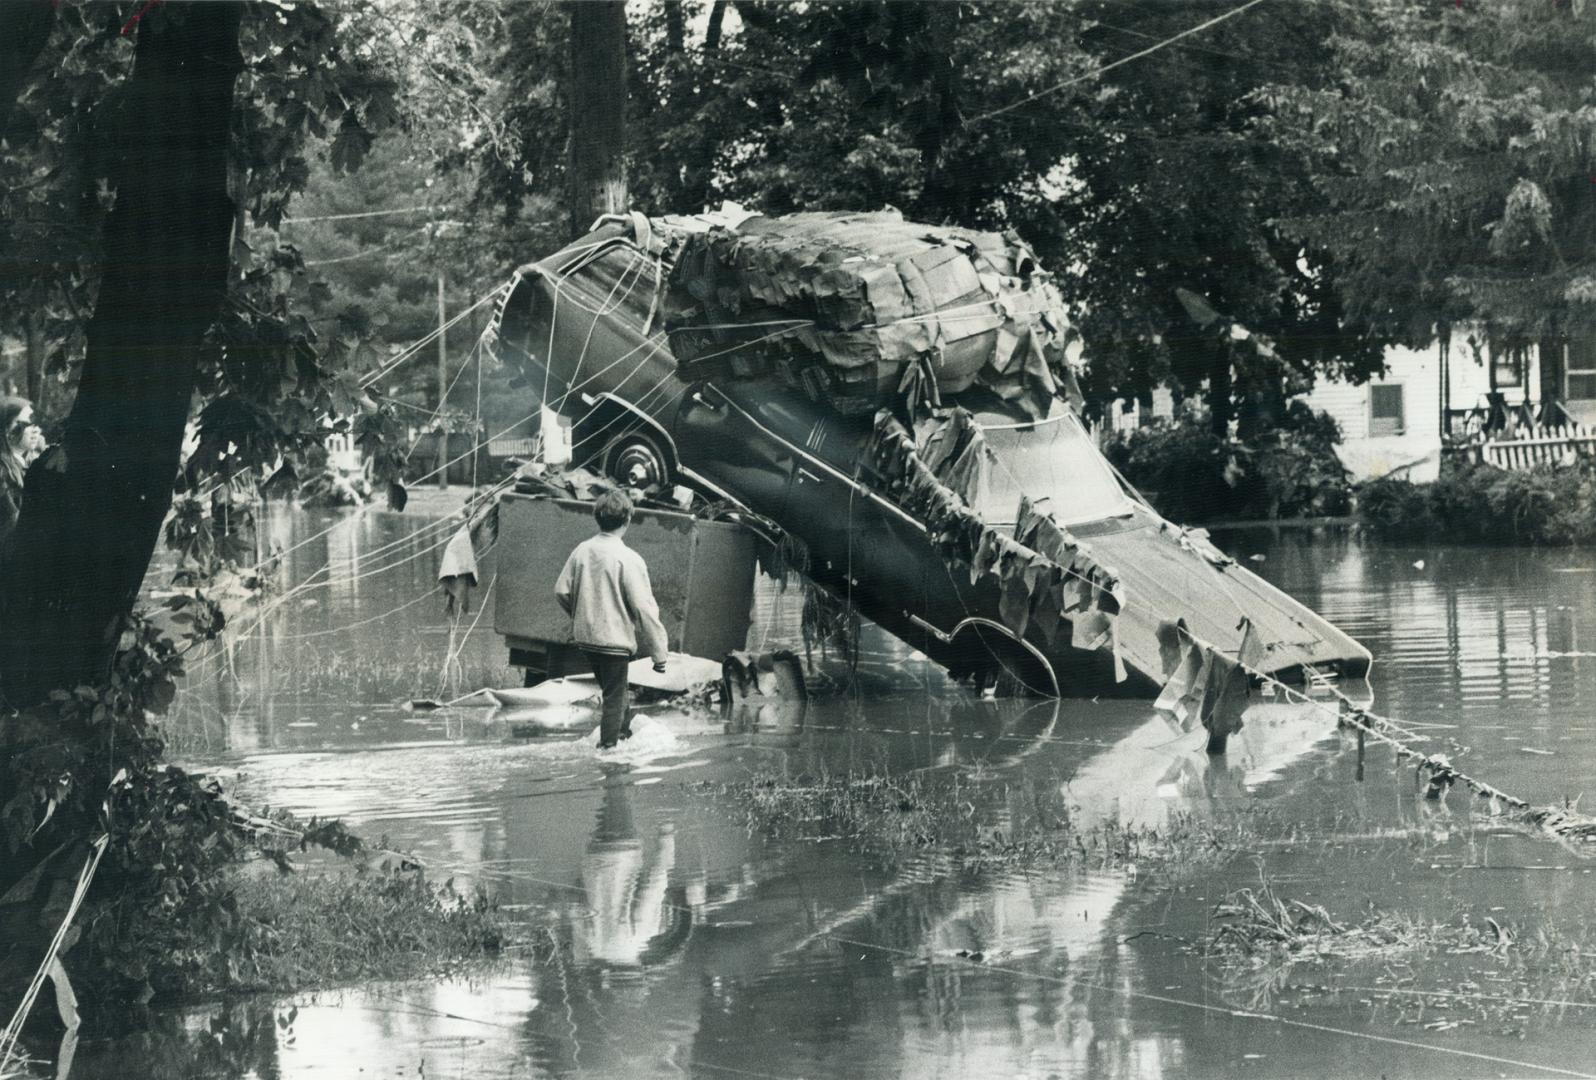 In corning, N.Y., one of hundreds of cars that were pushed through the streets by floodwaters lies entangled with debris as the waters subside. [incomplete]